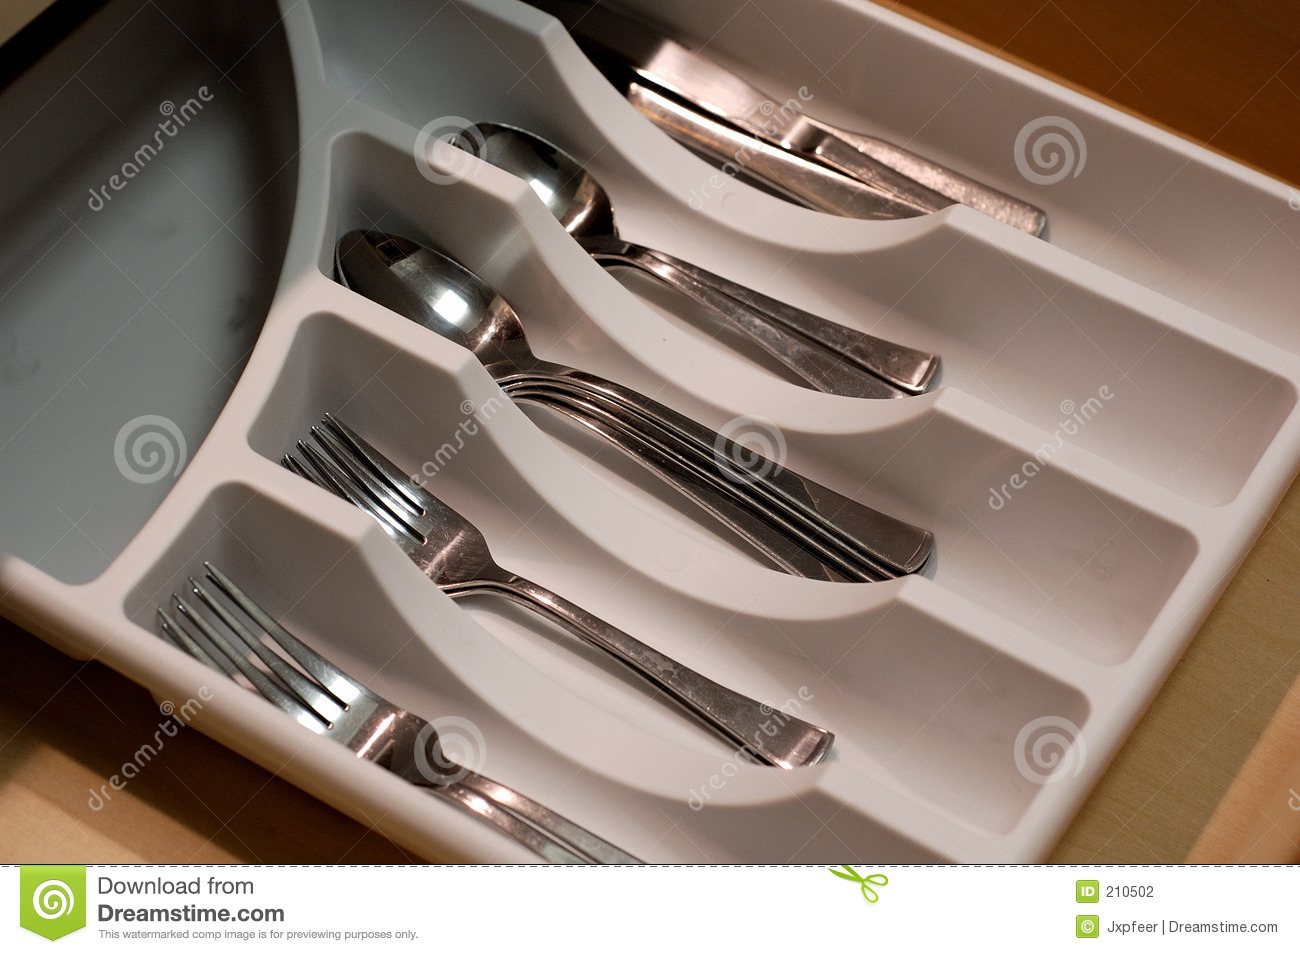 An Organize Kitchen Drawer With Forks Spoons And Knives In It 